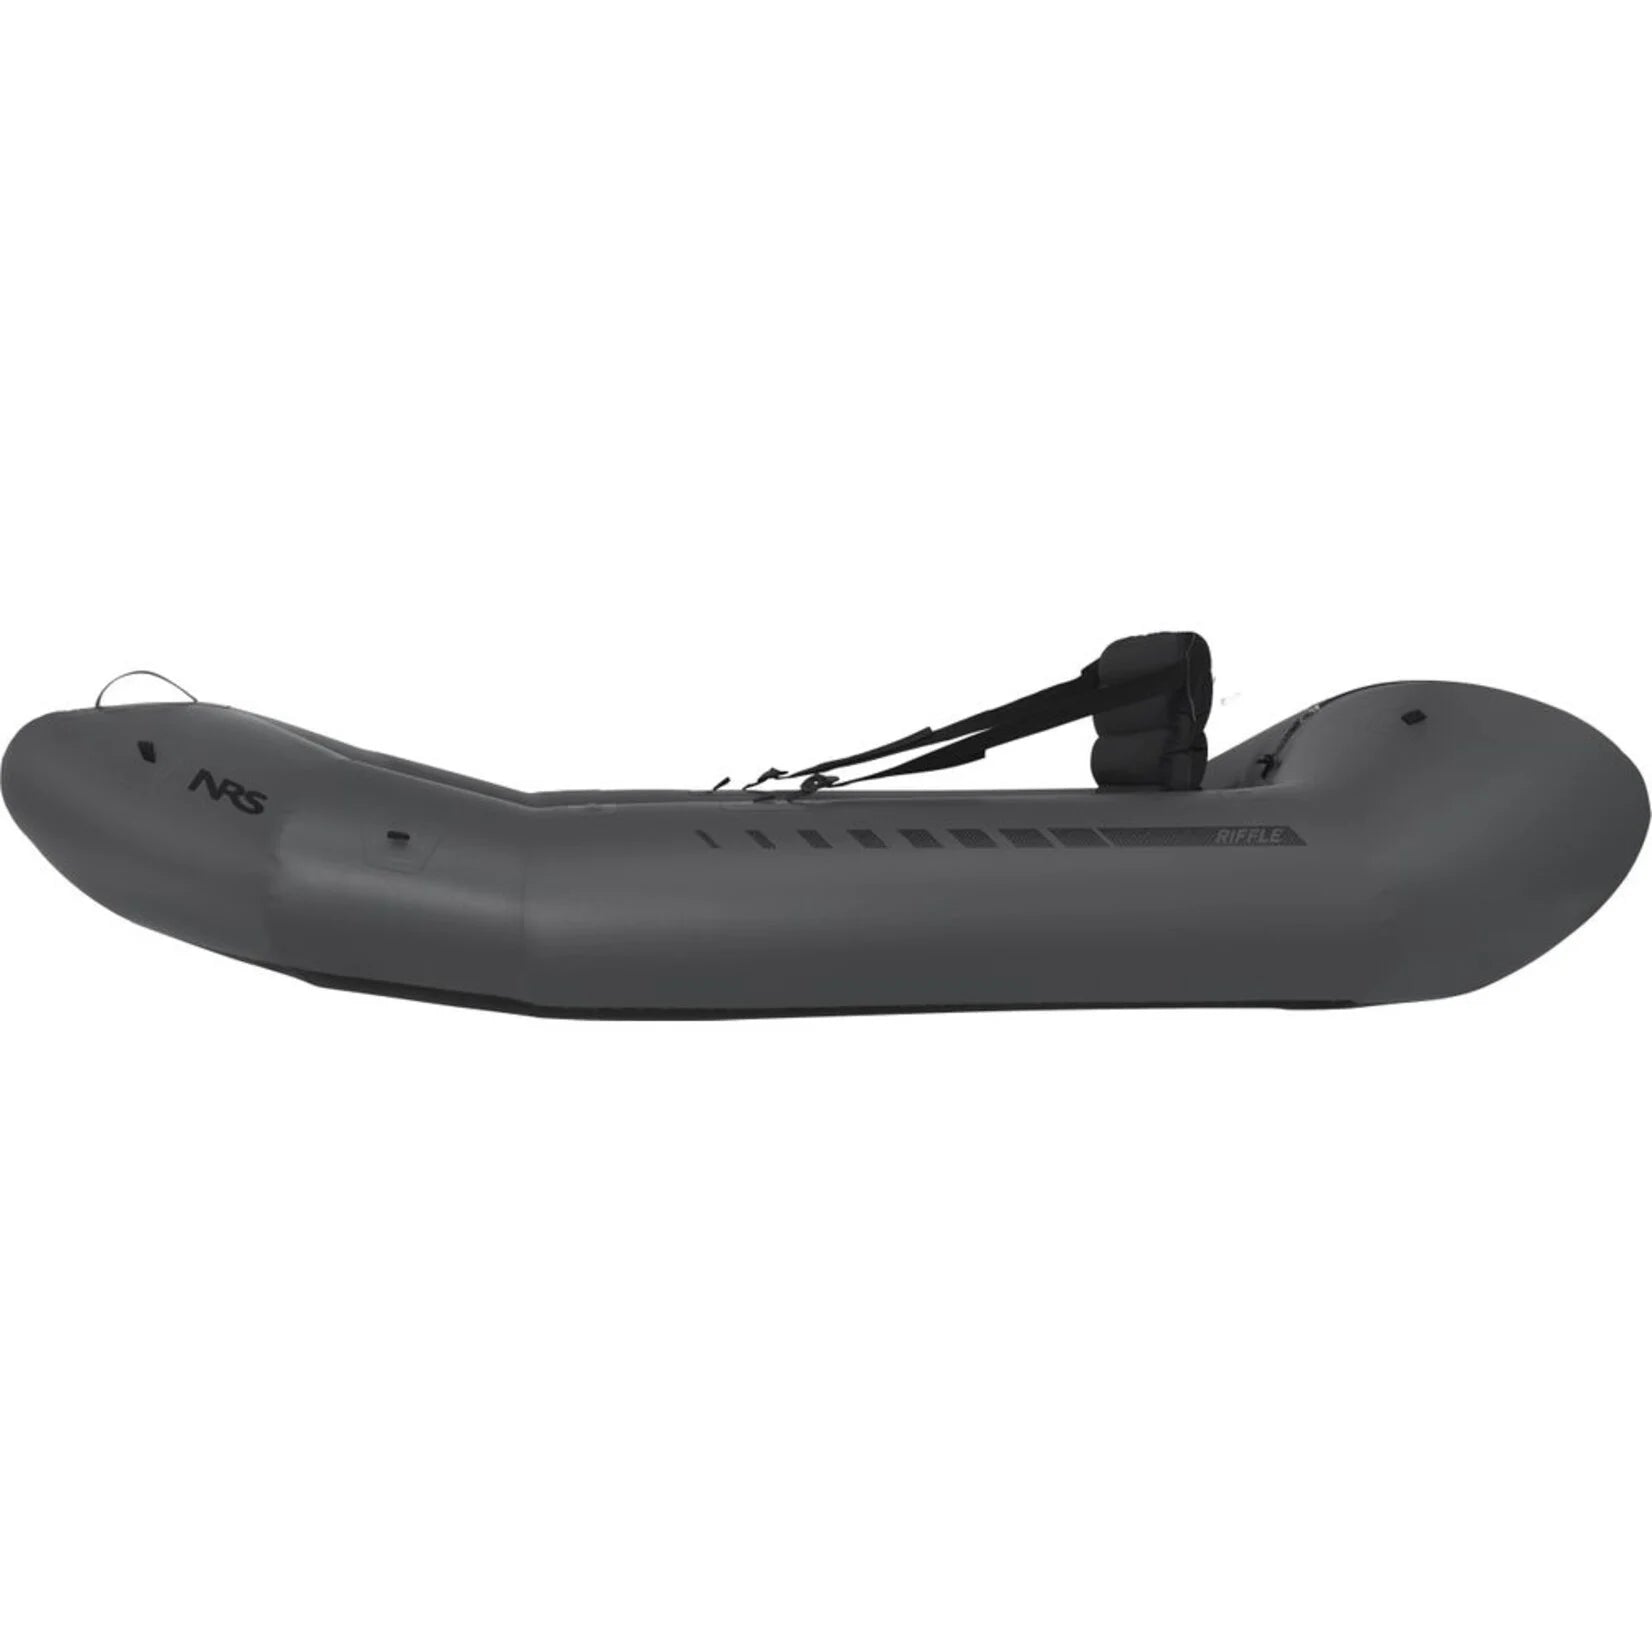 A lightweight black Riffle Fishing Packraft by NRS on a white background.